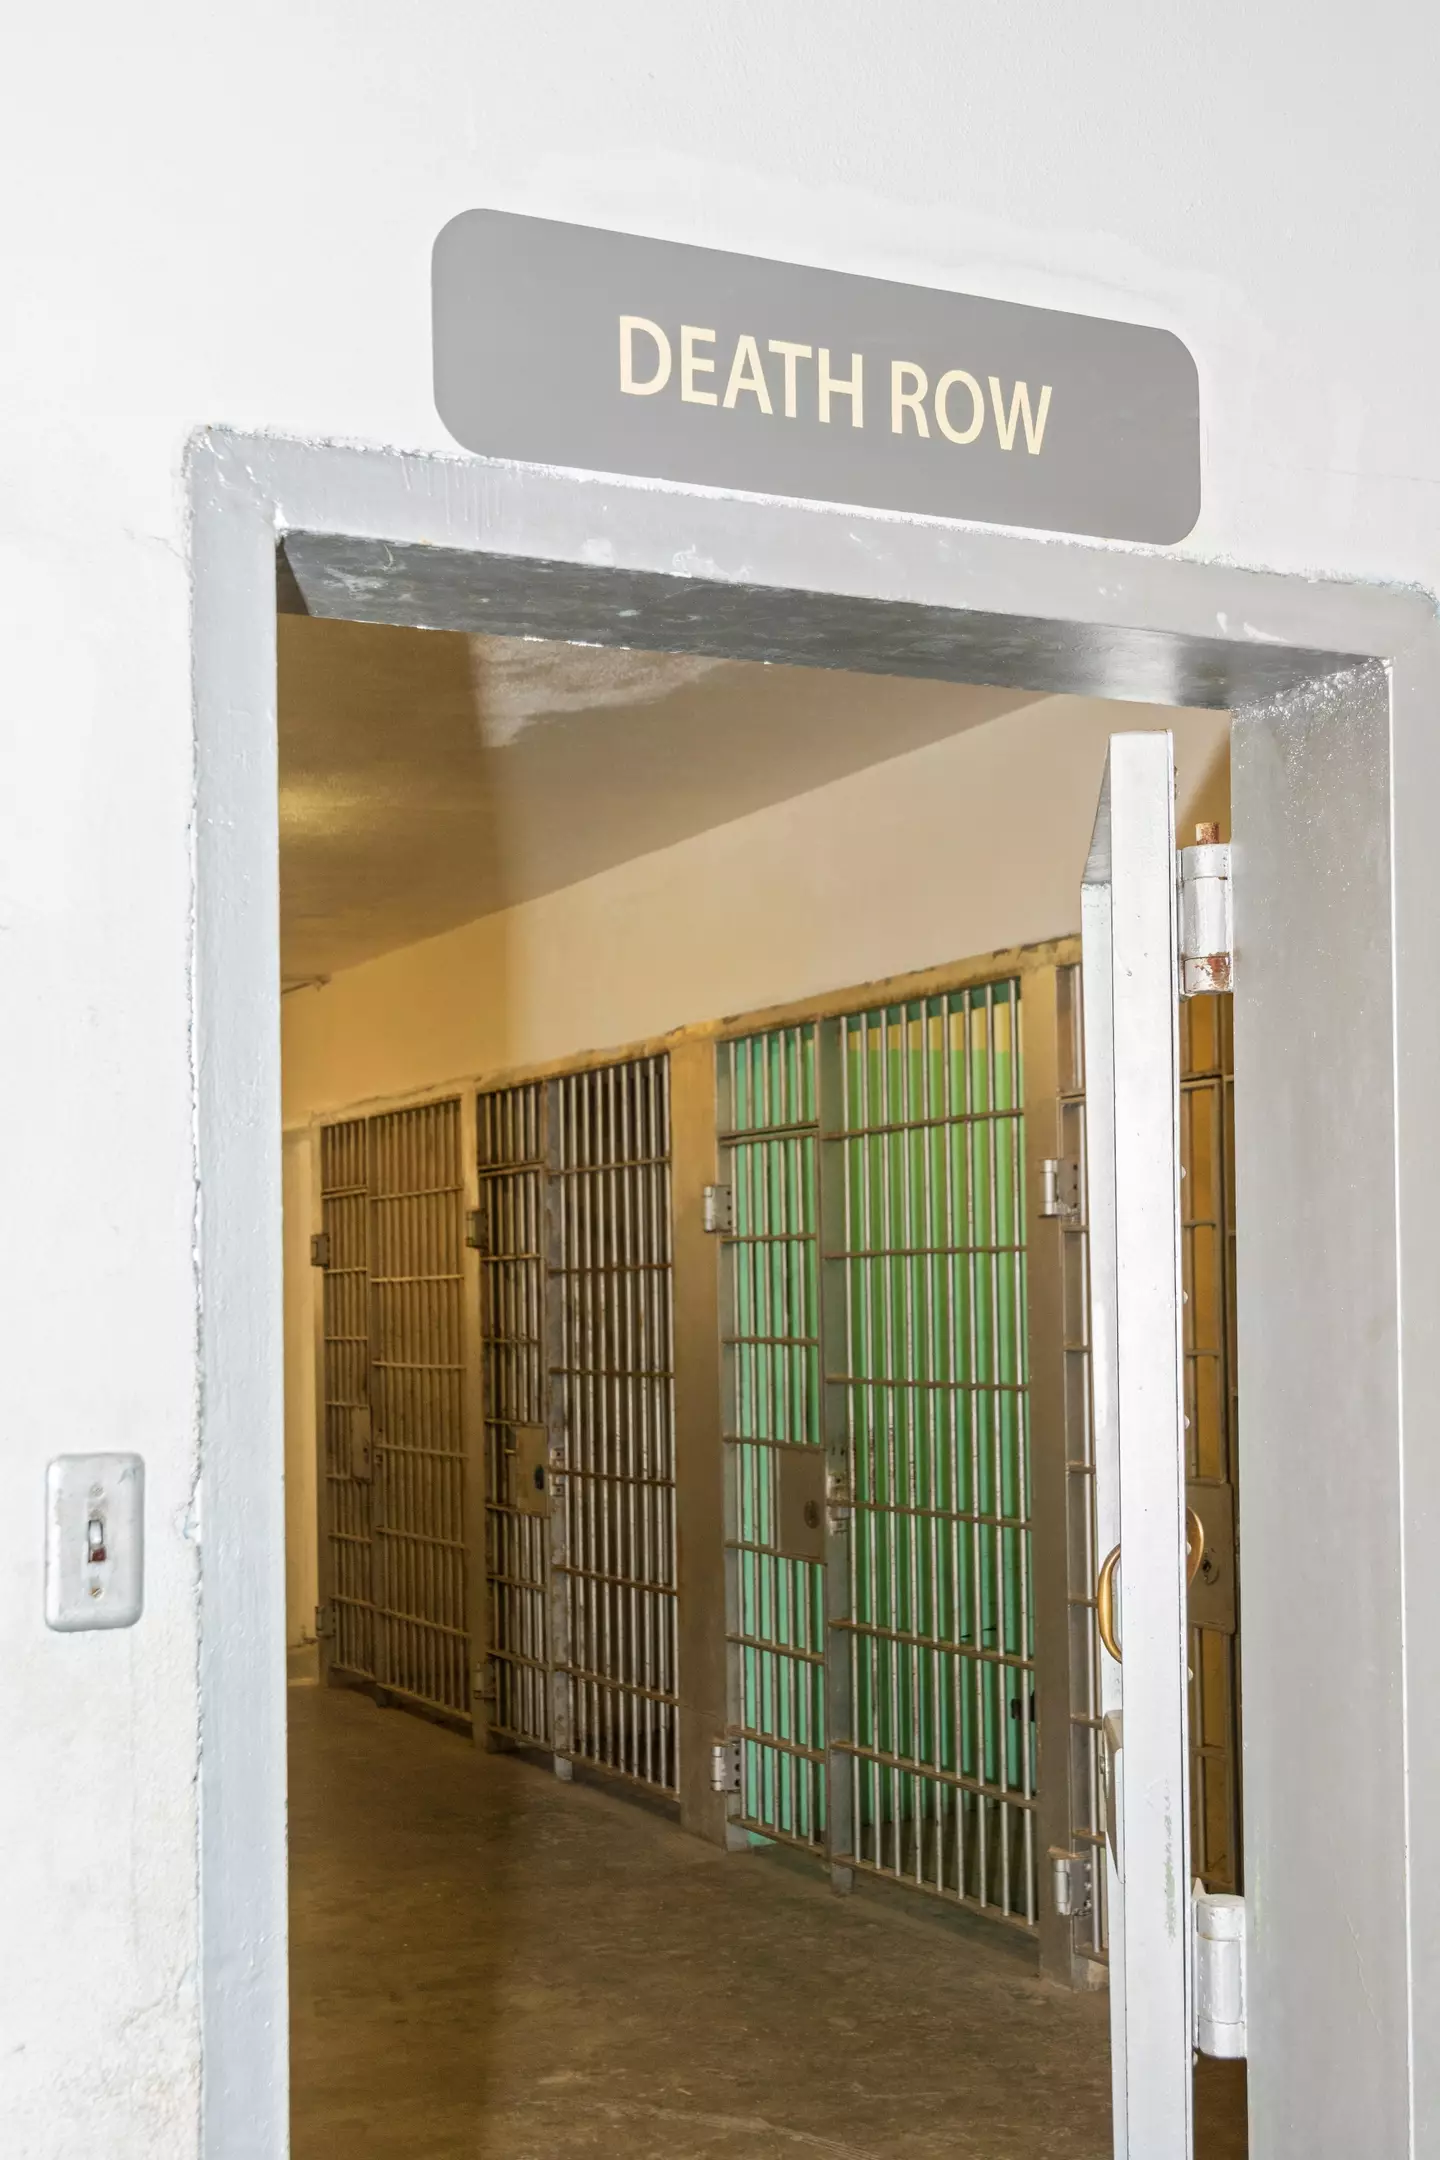 Moore has spent more than a decade on death row.